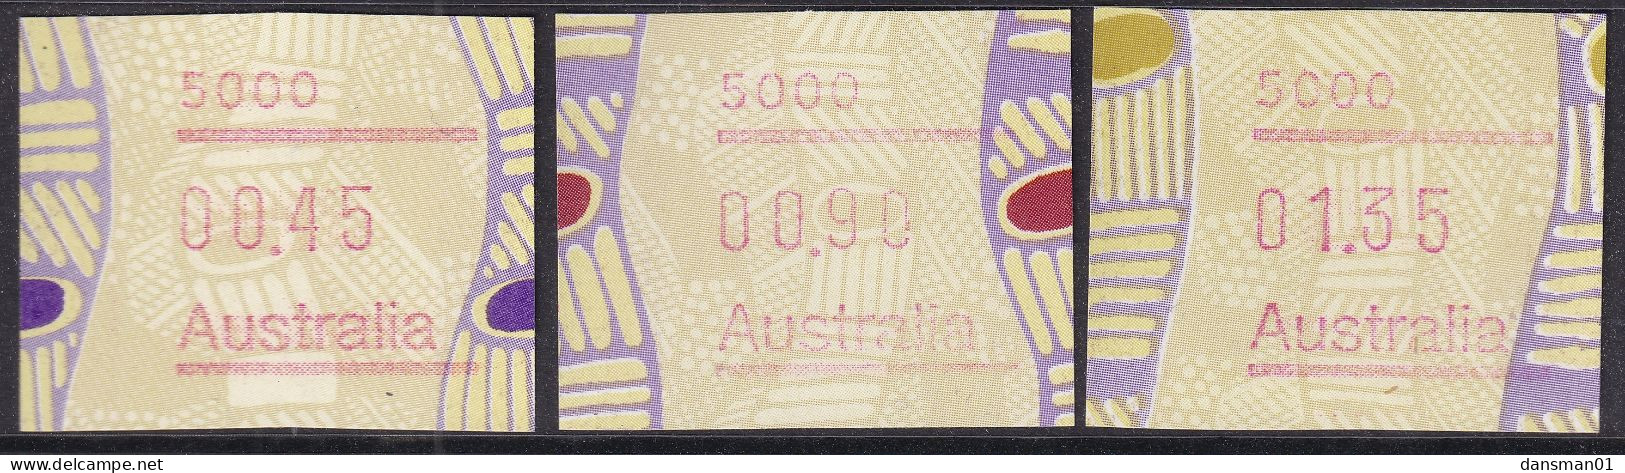 Australia 1999 Frama Button Set (3) Mint Never Hinged 5000 - Mint Stamps